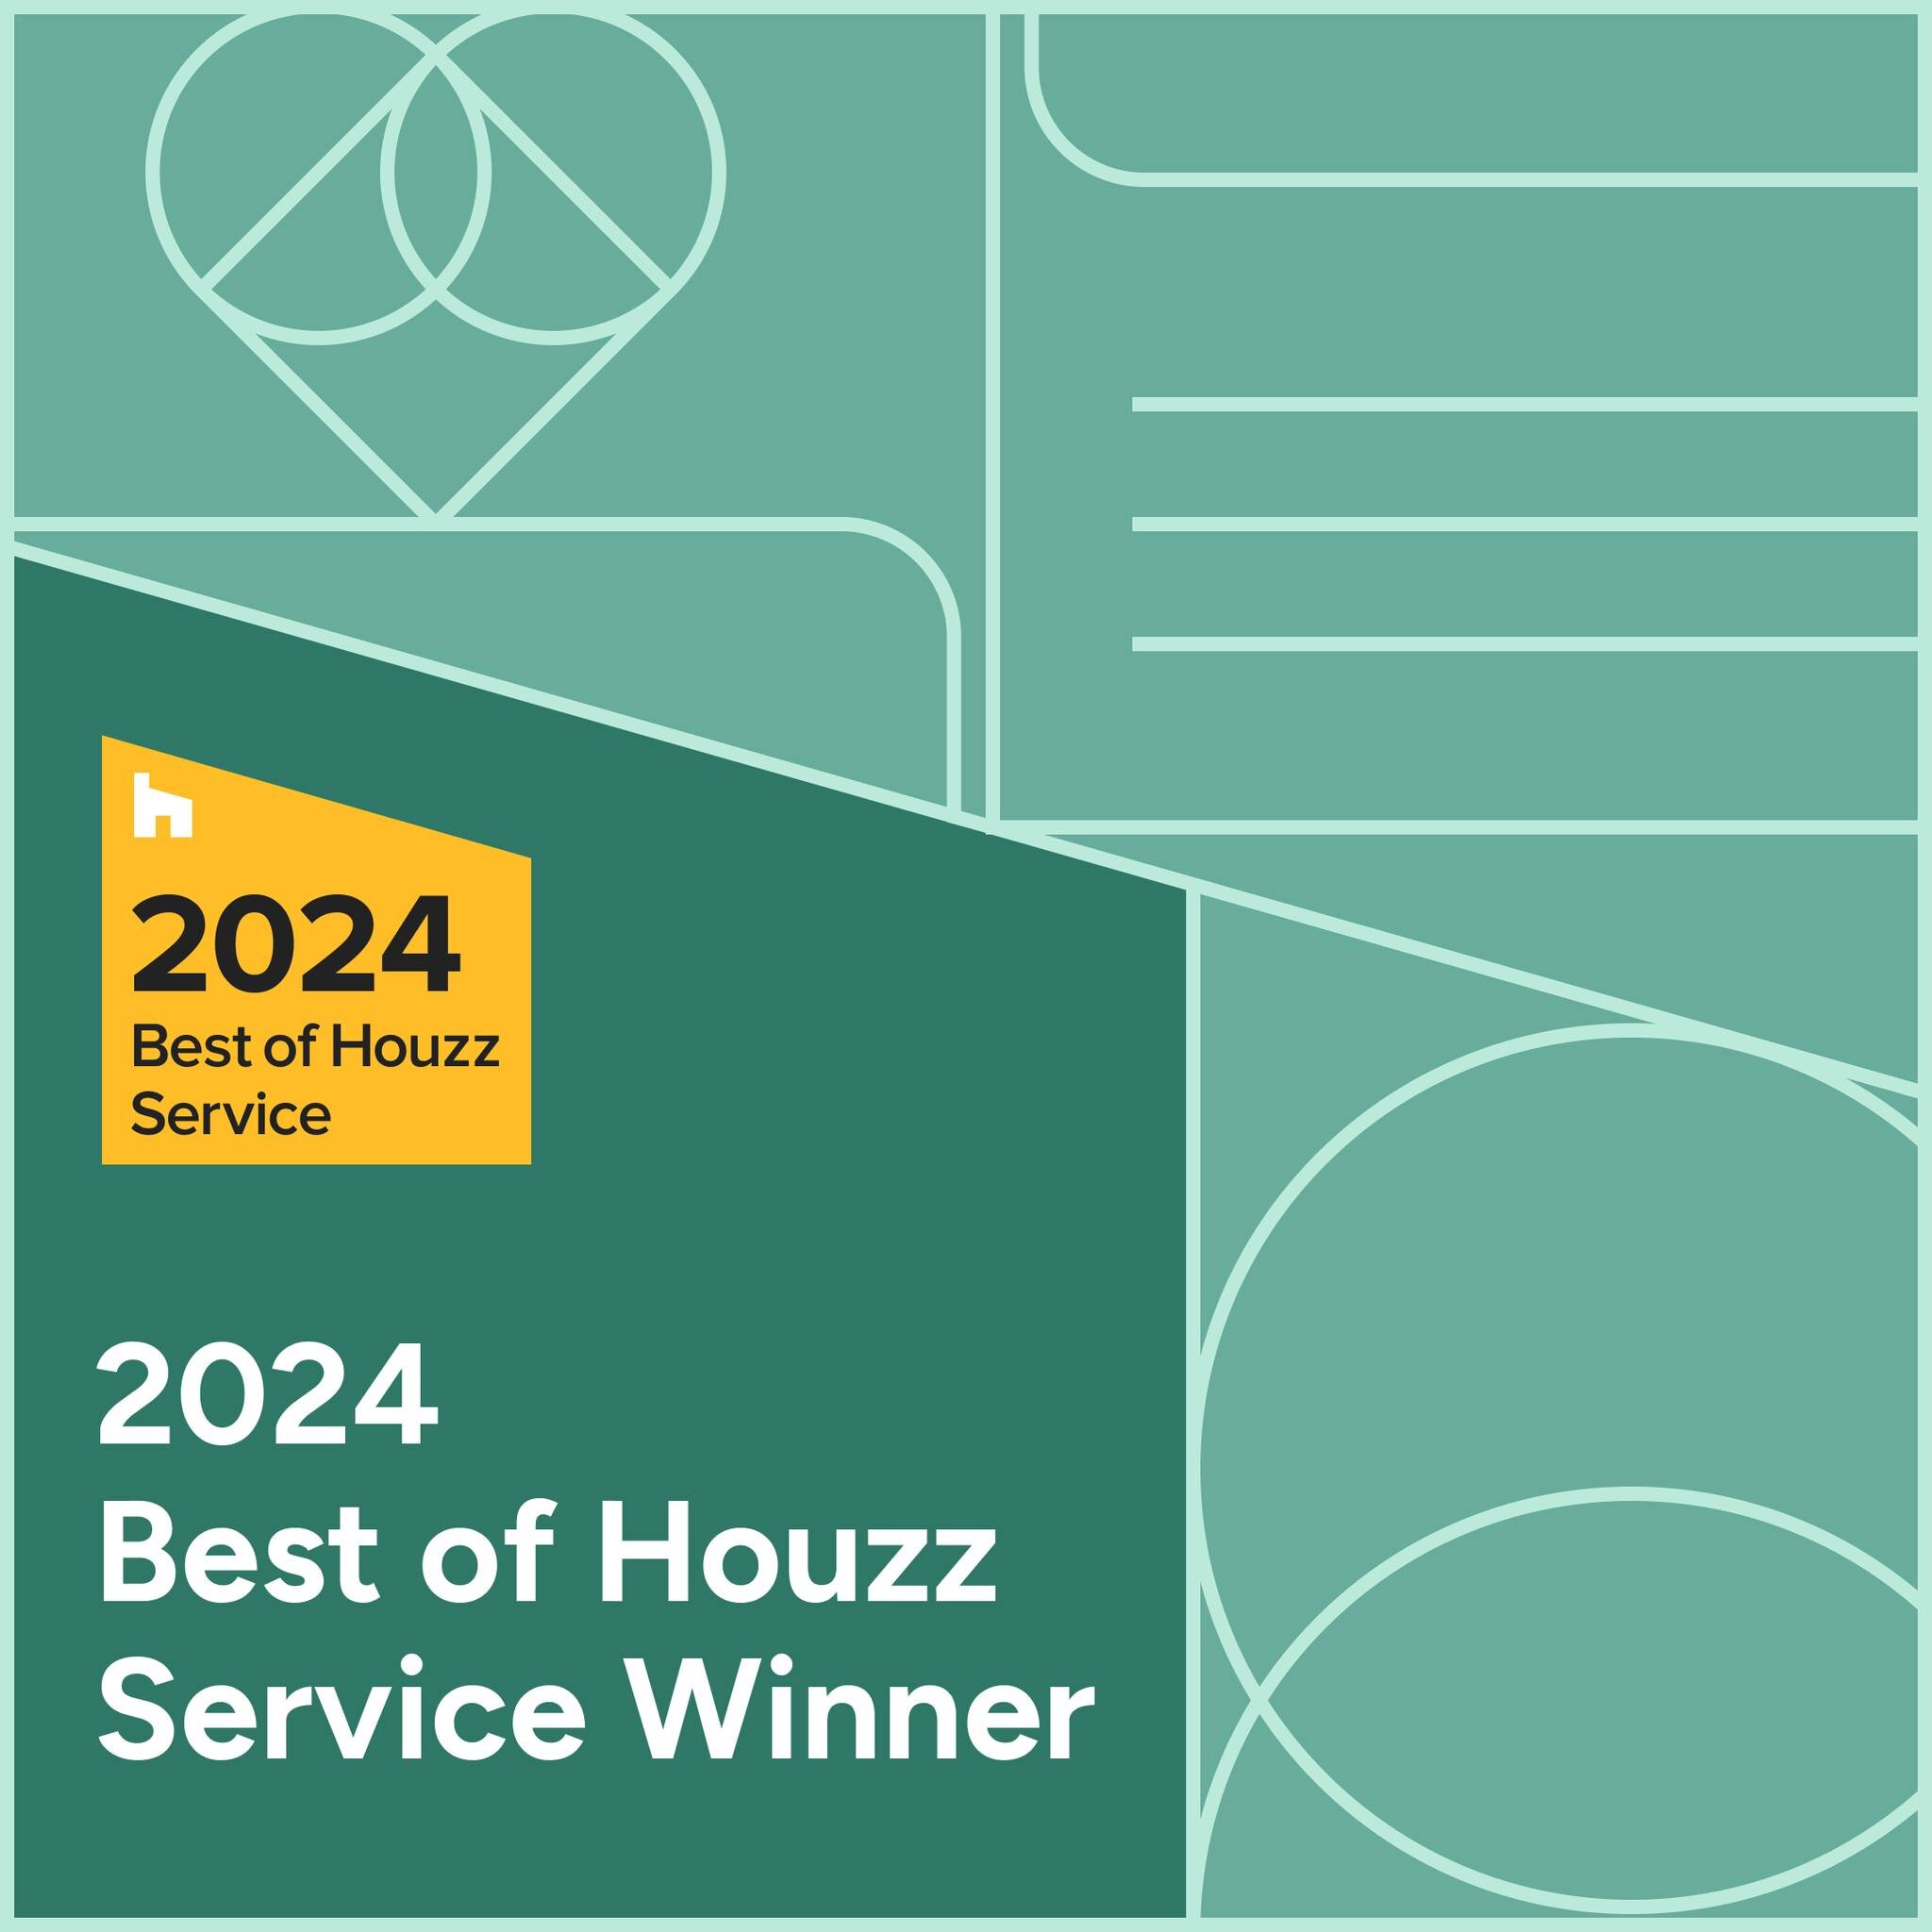 We&rsquo;re thrilled to share that REDinterior is a Best of Houzz 2024 winner 😍! This is our 7th year of Best of Houzz Service, yay us. We&rsquo;re so honored to be recognized for our work.
.
.
.
.
.
@houzz @houzzpro #BestofHouzz2024 #BestofHouzz #k